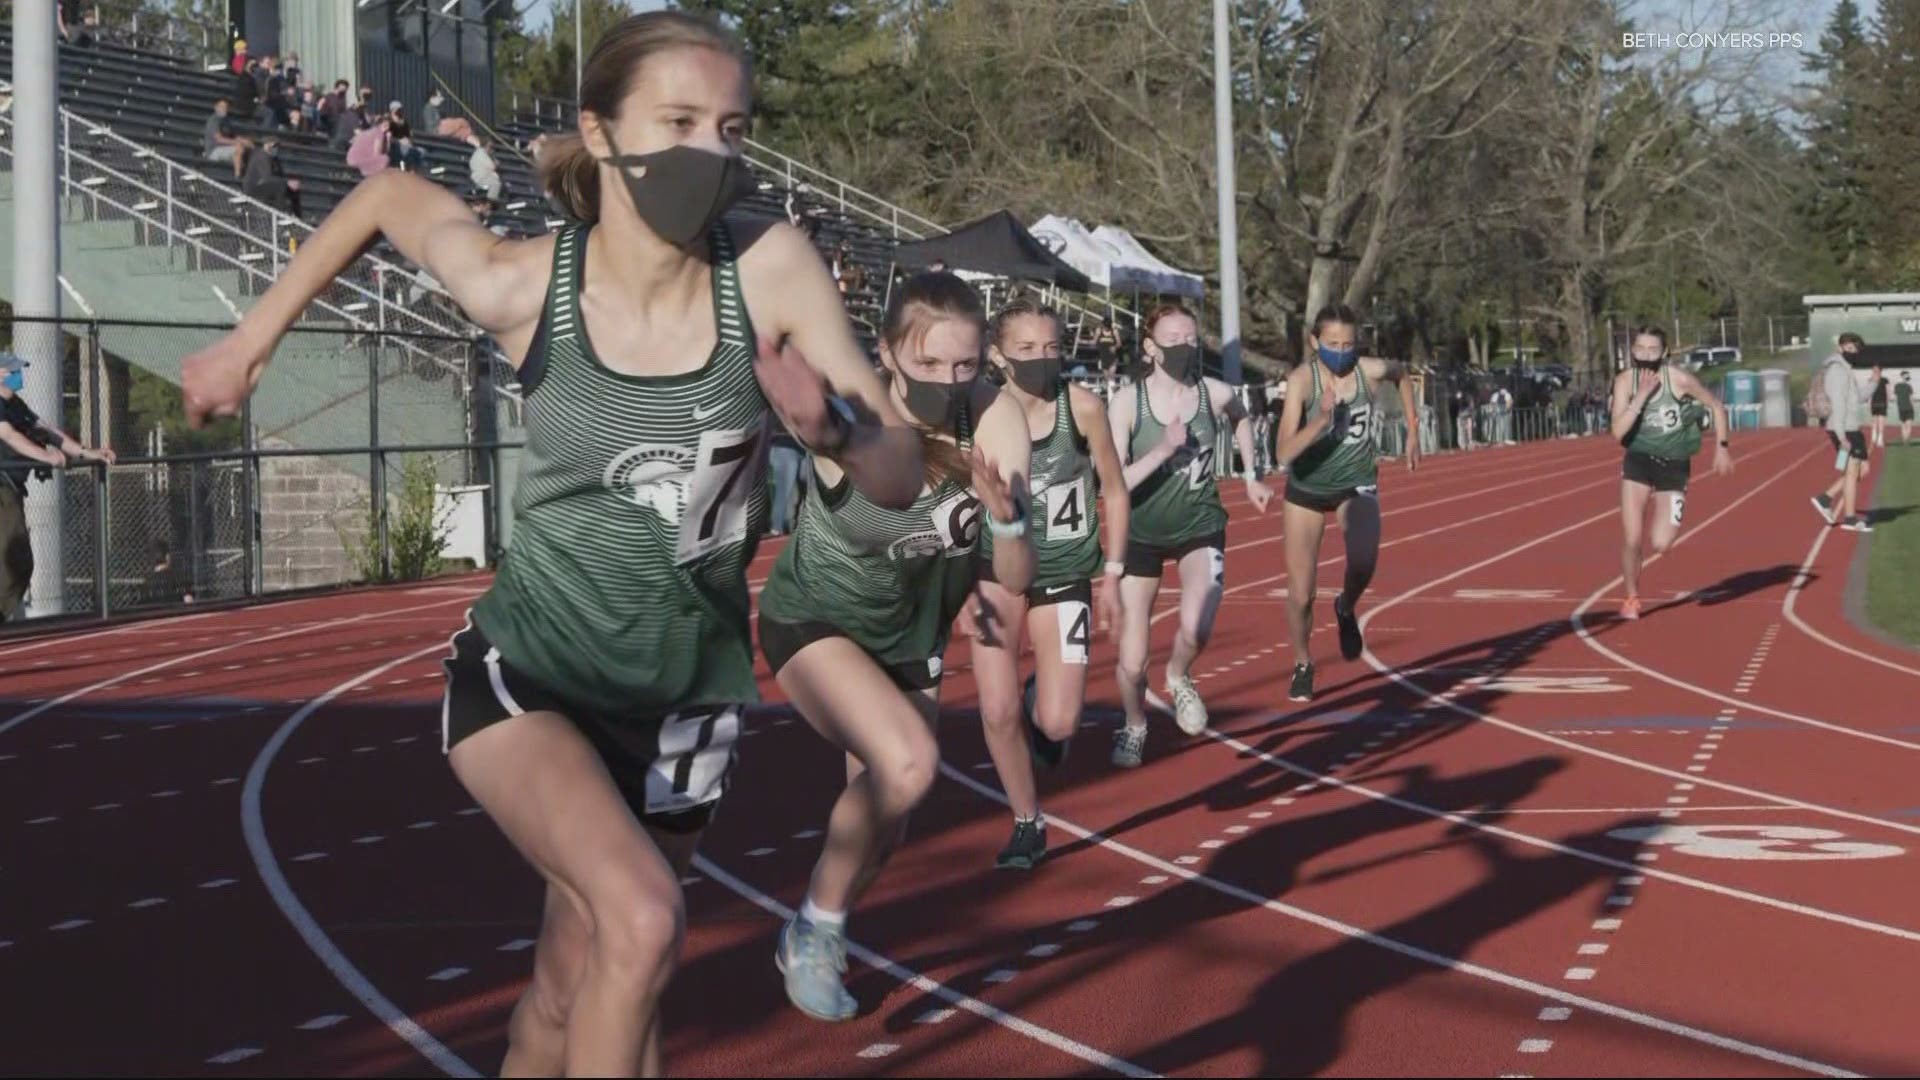 The state’s new COVID mask rules for student athletes allow them to take off masks while competing outdoors. Pat Dooris has the latest.